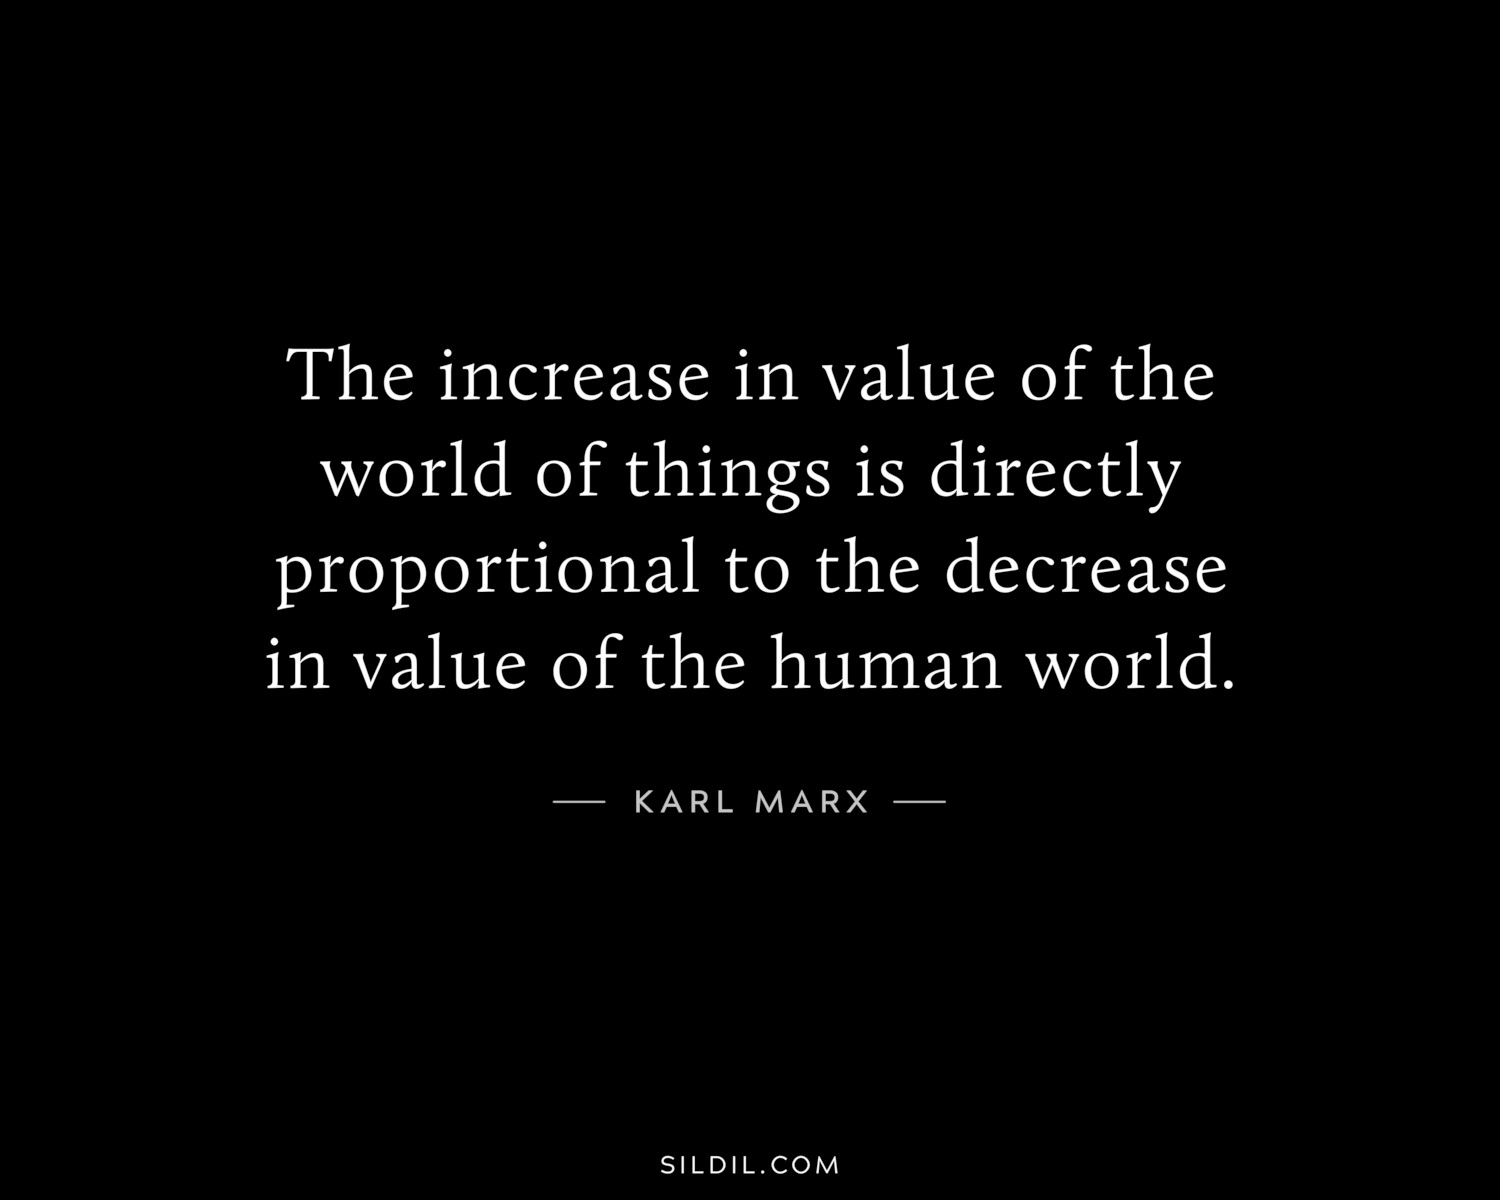 The increase in value of the world of things is directly proportional to the decrease in value of the human world.